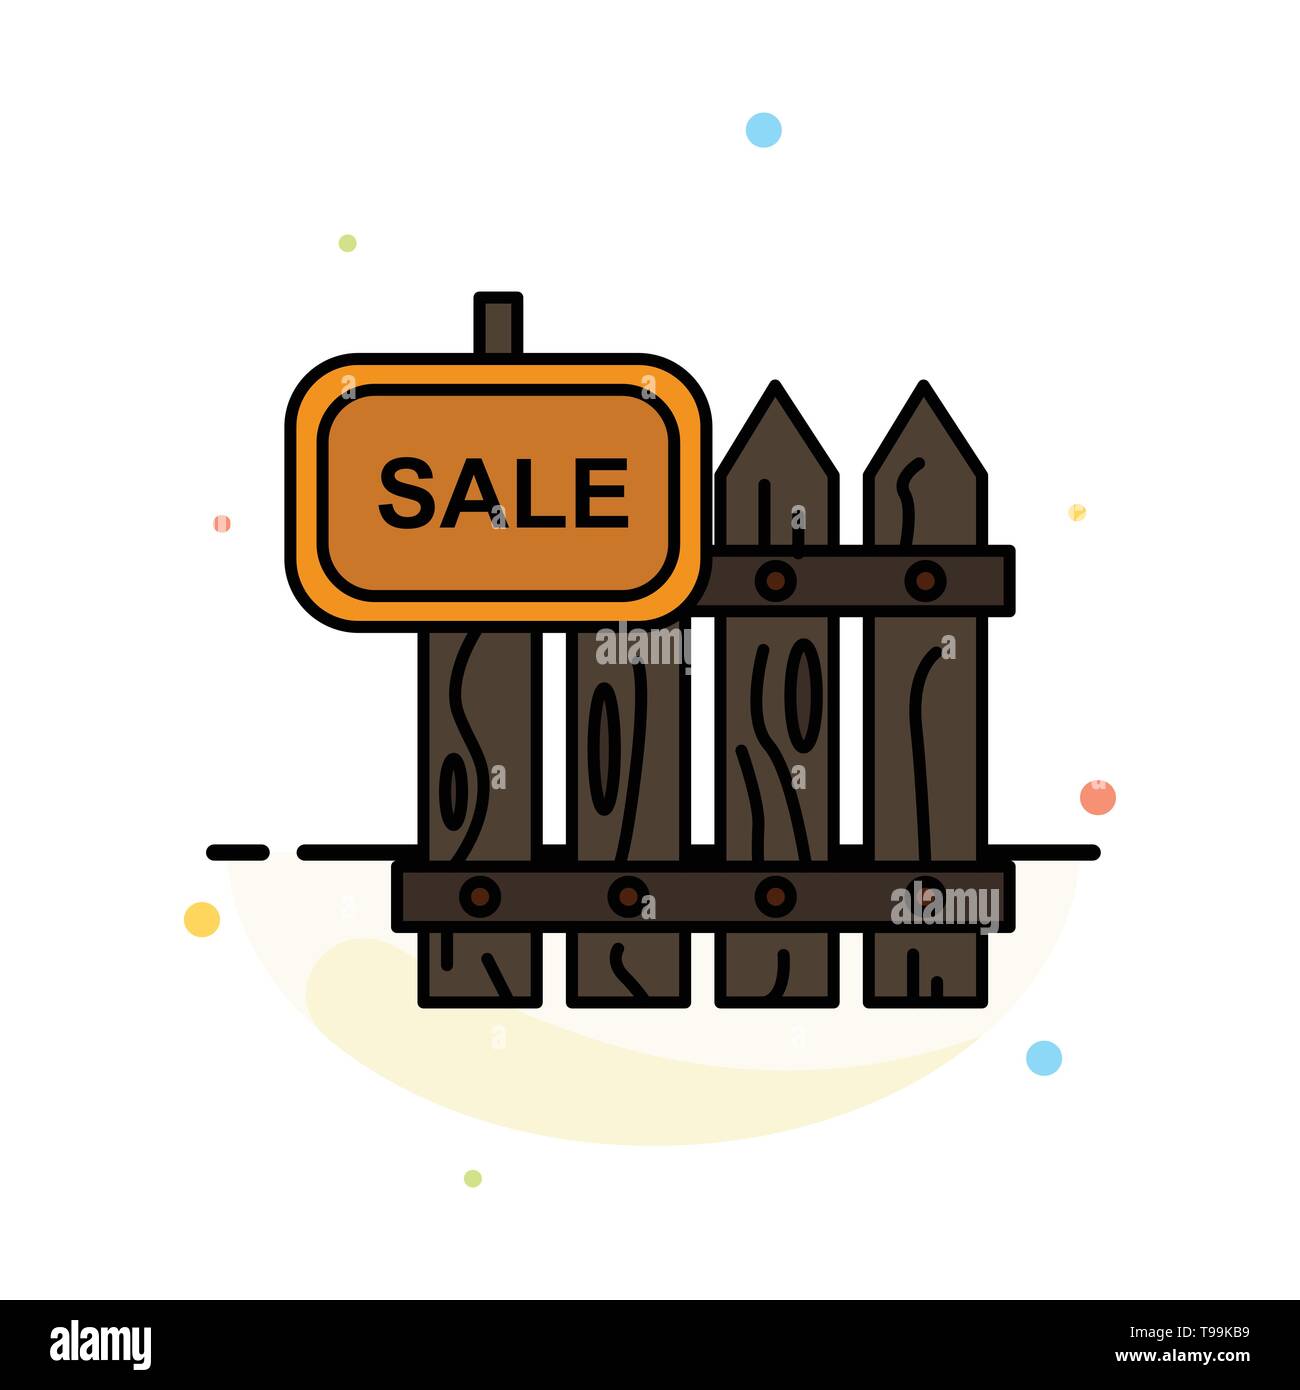 Fence, Wood, Realty, Sale, Garden, House Abstract Flat Color Icon Template Stock Vector